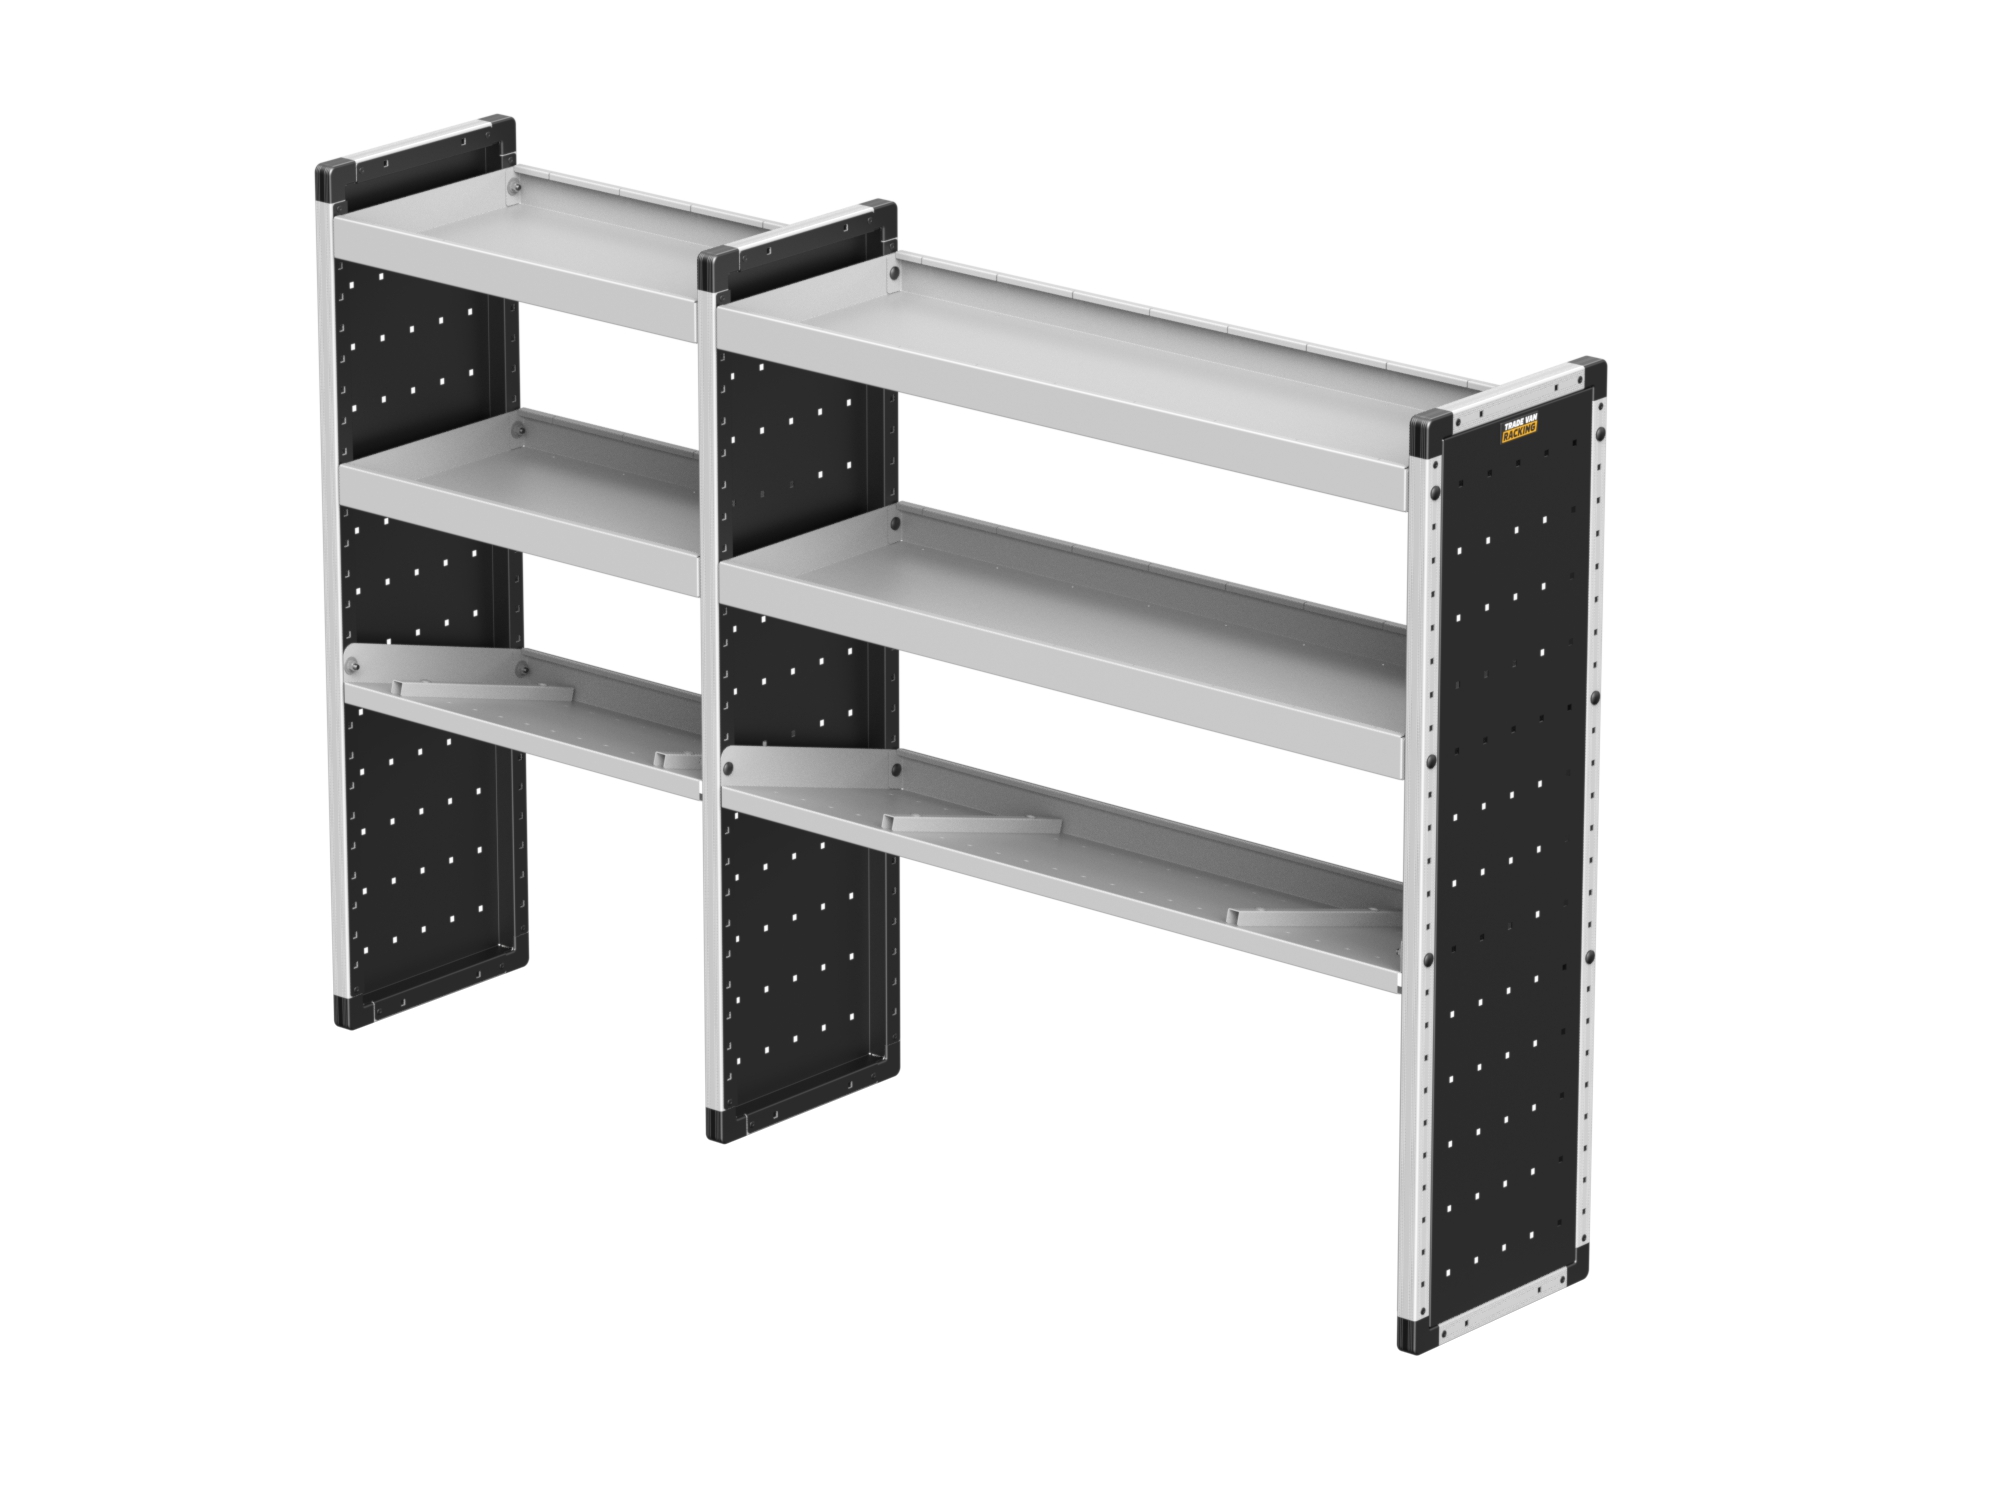 Trade Van Racking - Double Unit - 2 straight & 1 angled per bay - TVR-DBL-009